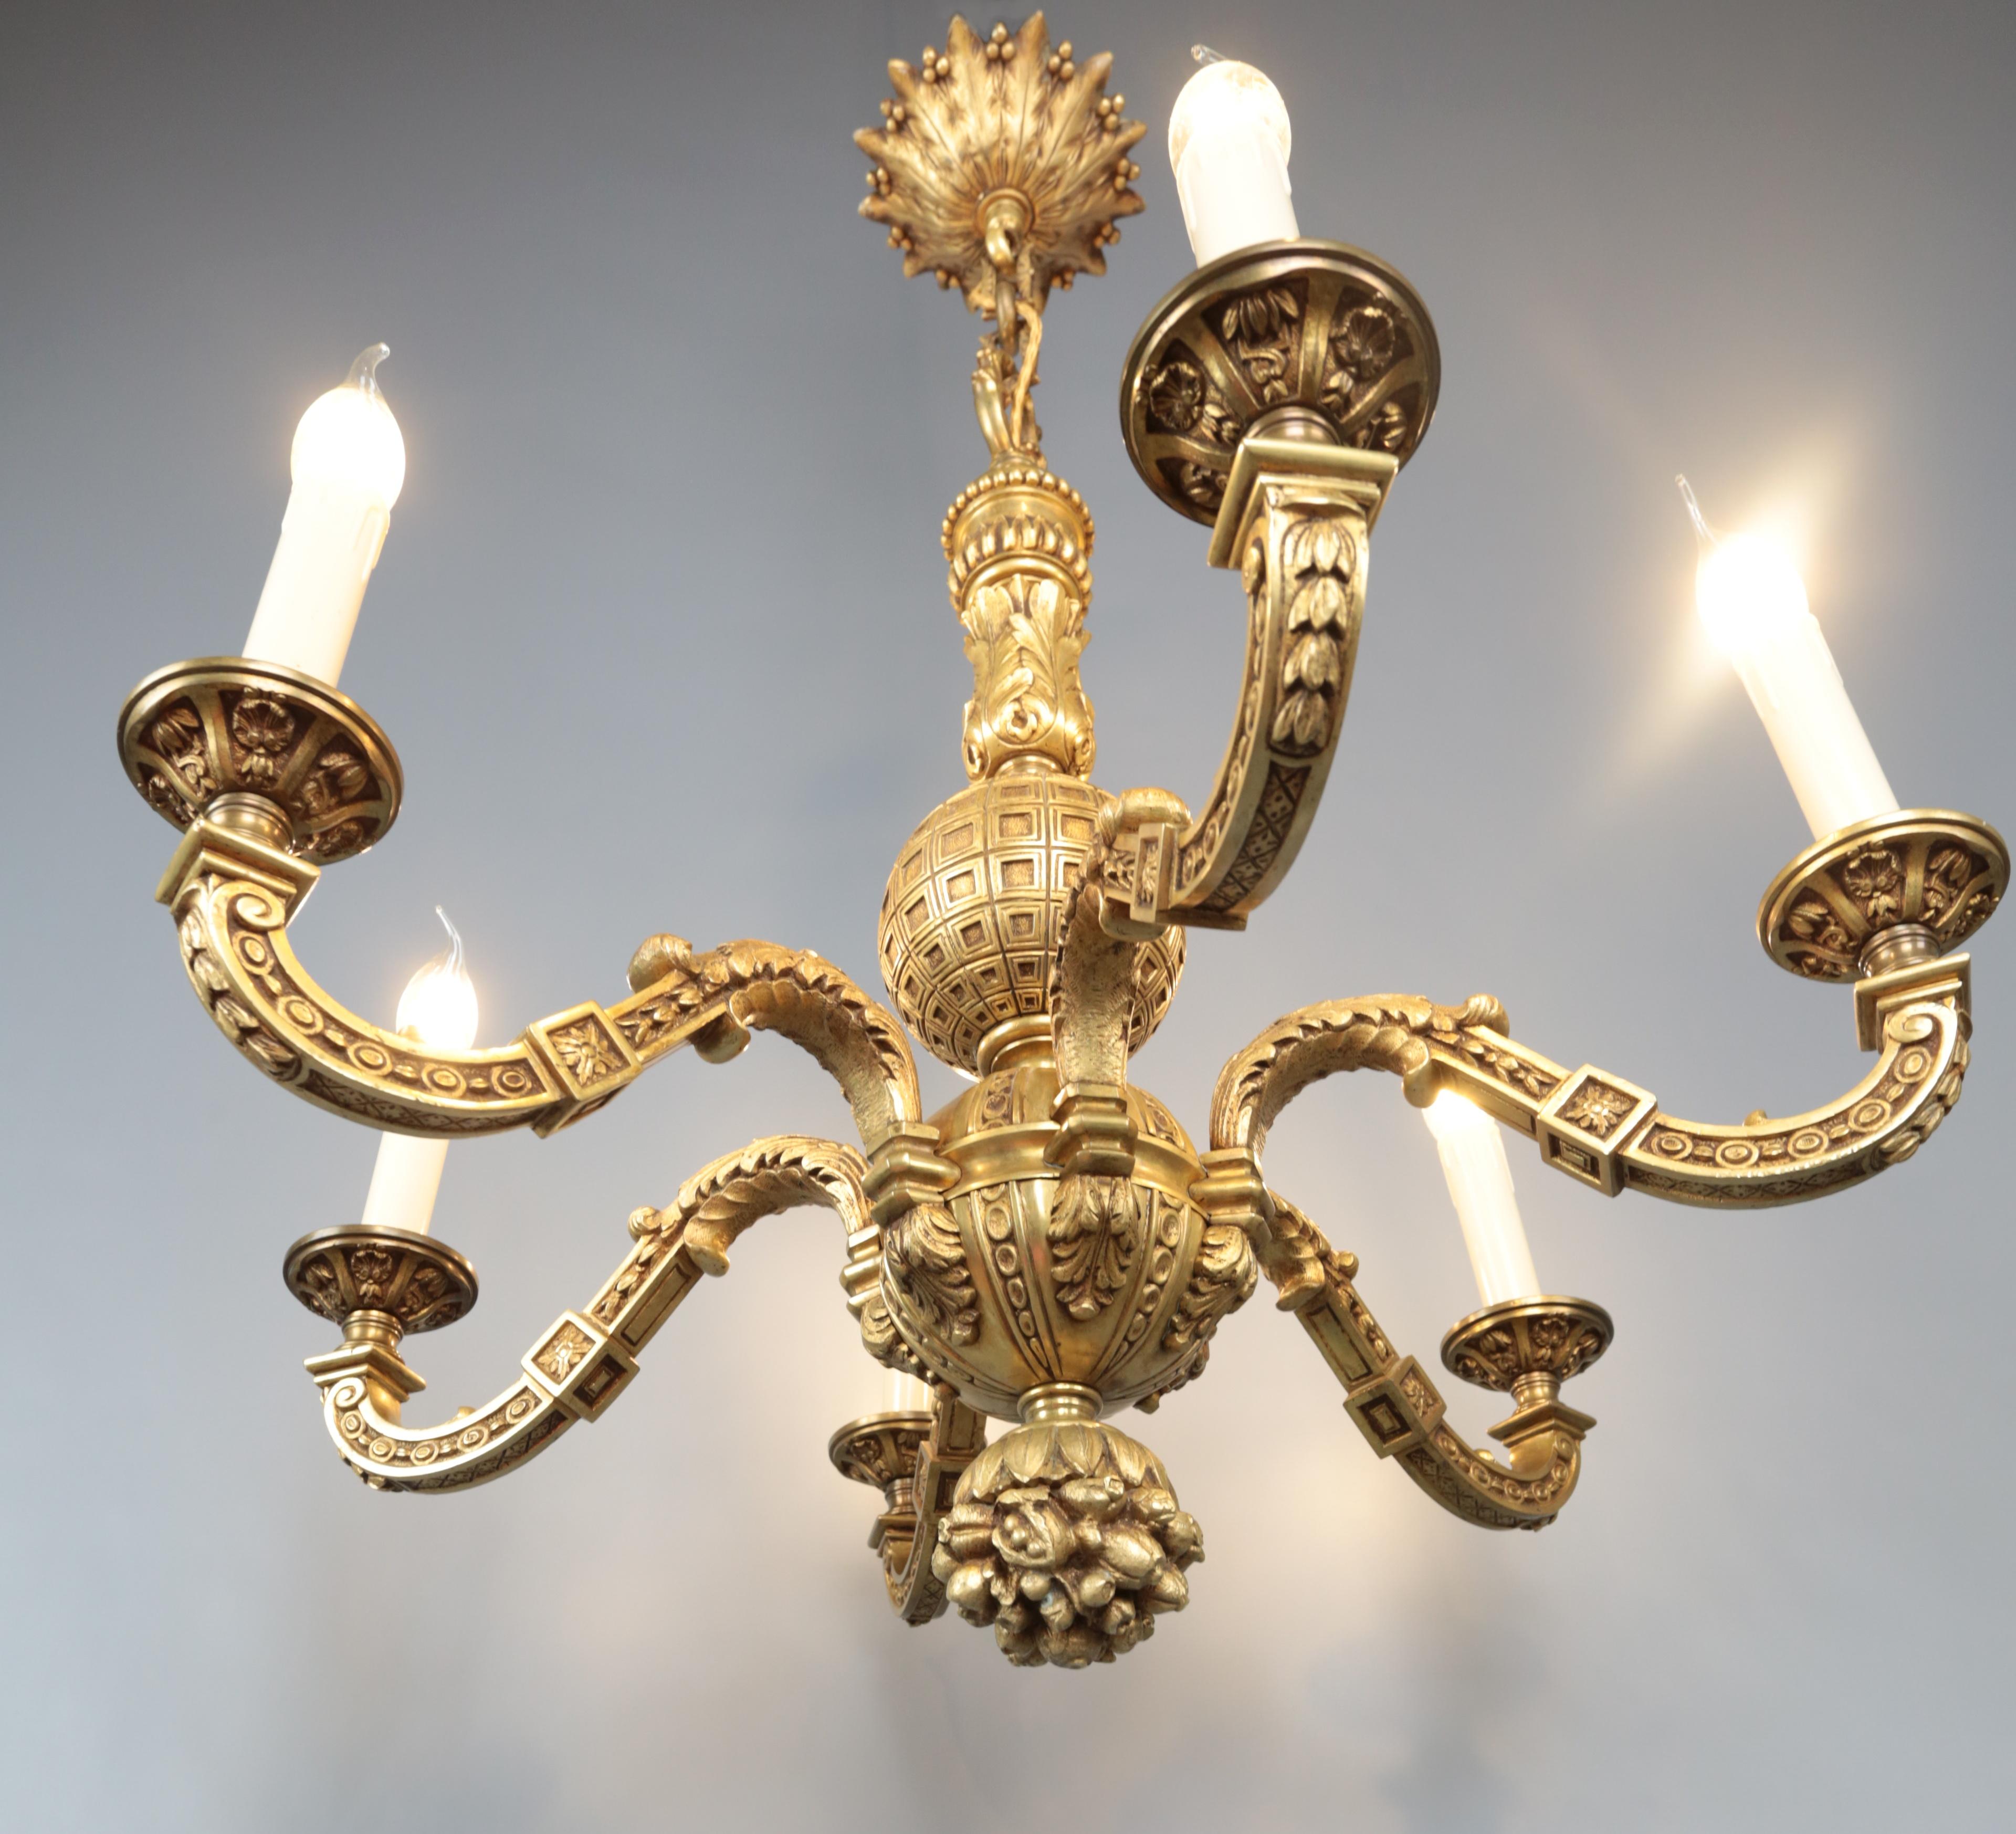 Antique Mazarin Pineapple Chandelier

Six-armed antique Louis XIV gilt bronze chandelier with pineapple motif. Top quality workmanship. A rarer type of Mazarin chandelier. The chandelier has a new supply cable in the old style with fabric covering